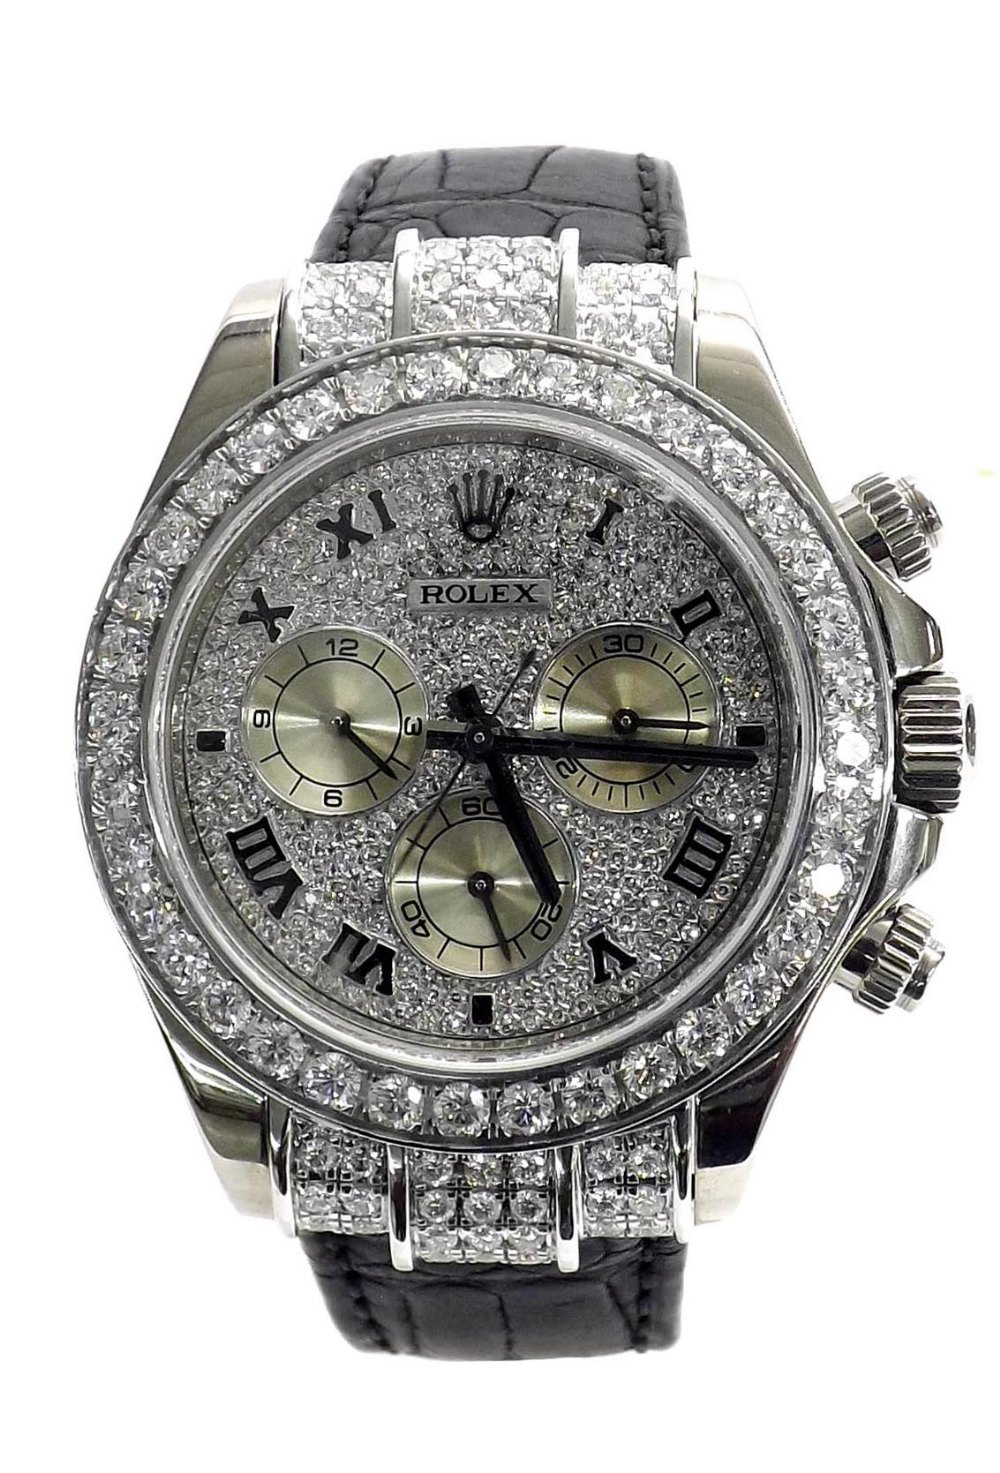 (15 544330-1-A) Impressive Rolex Oyster Perpetual Cosmograph Daytona 18ct white gold and diamond